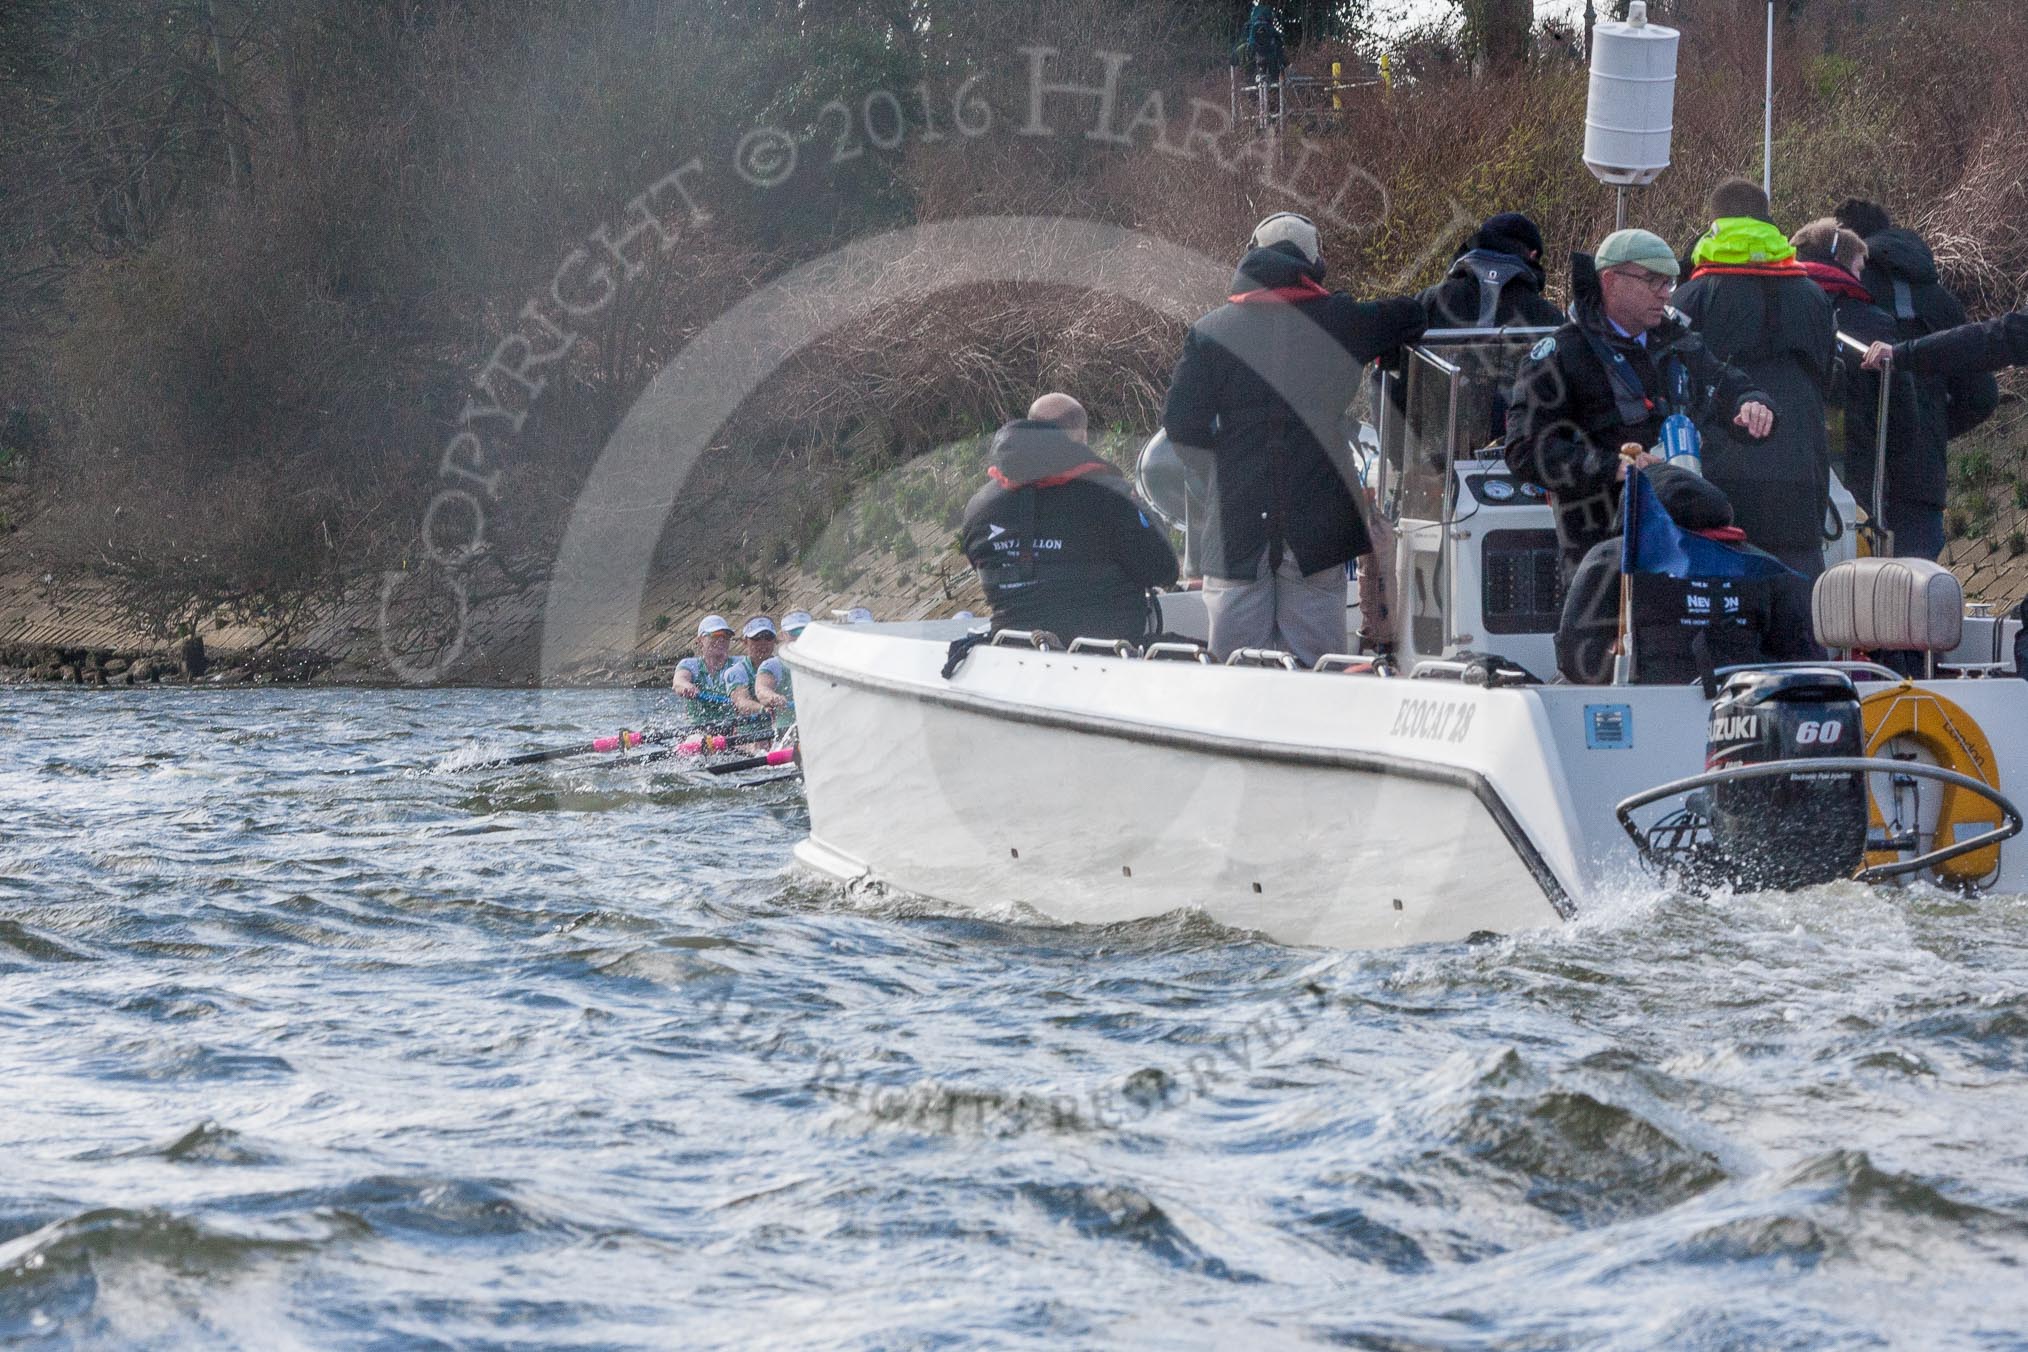 The Boat Race season 2016 -  The Cancer Research Women's Boat Race.
River Thames between Putney Bridge and Mortlake,
London SW15,

United Kingdom,
on 27 March 2016 at 14:29, image #301